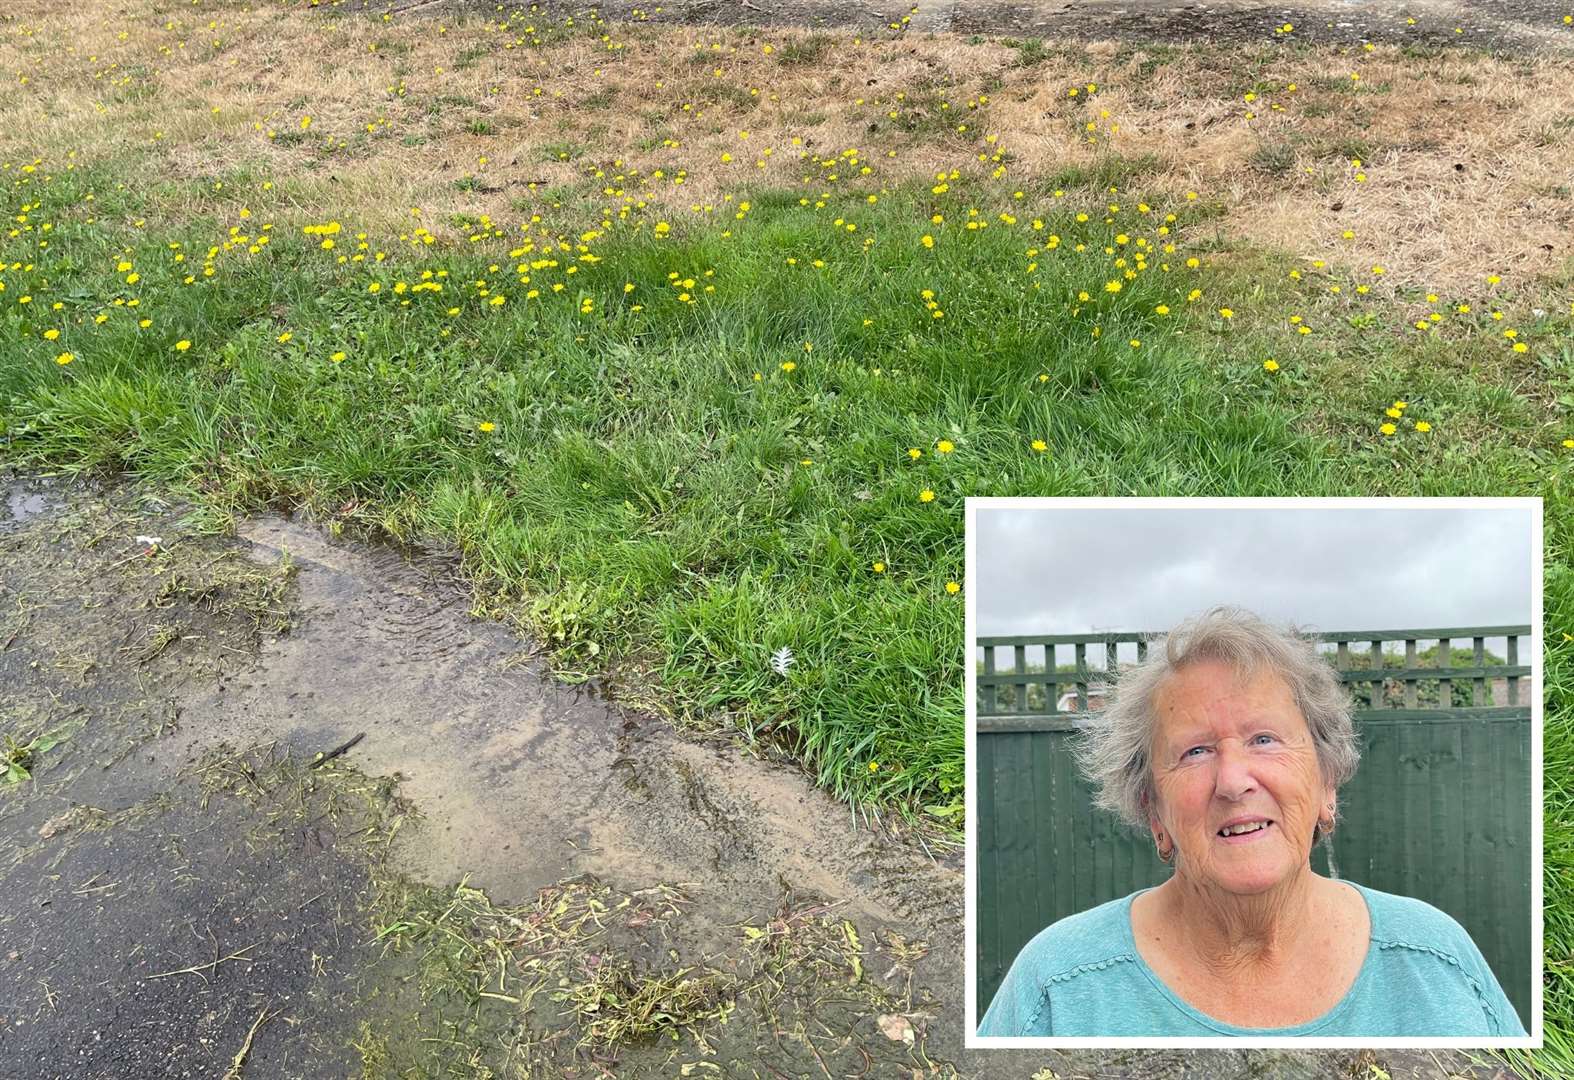 'Water leak has gone on so long the grass has turned green'